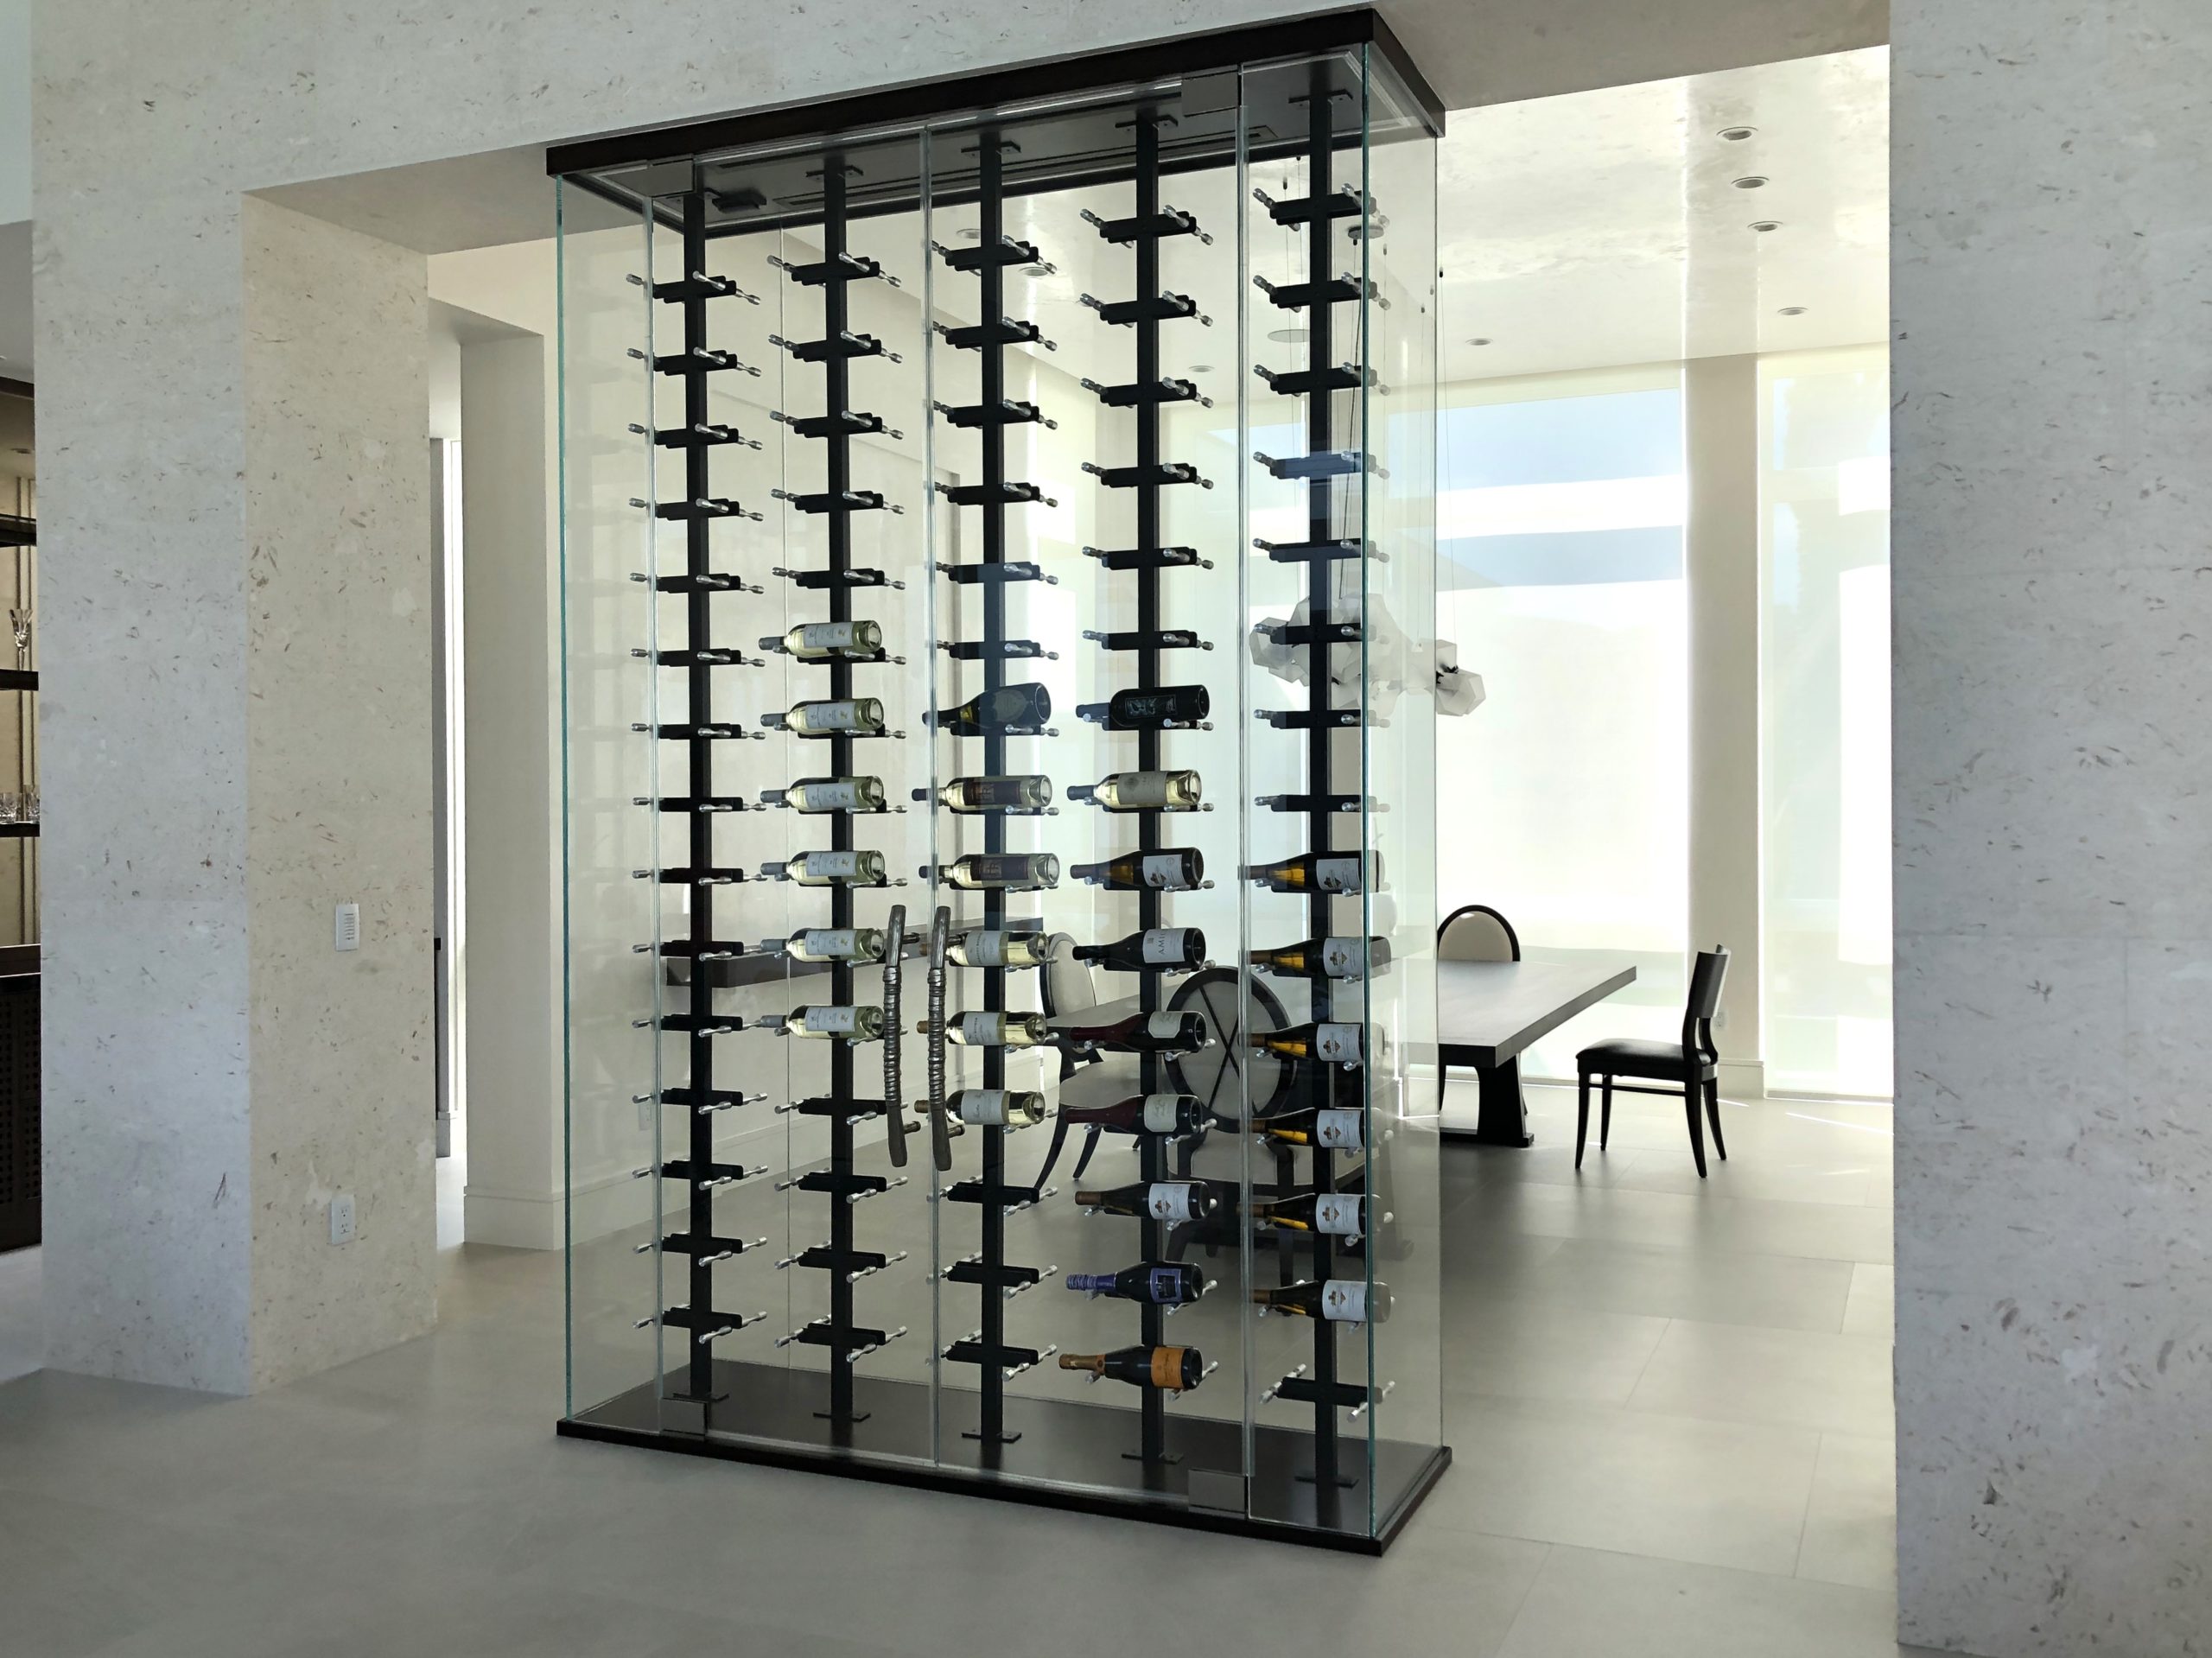 Glass enclosed wine room